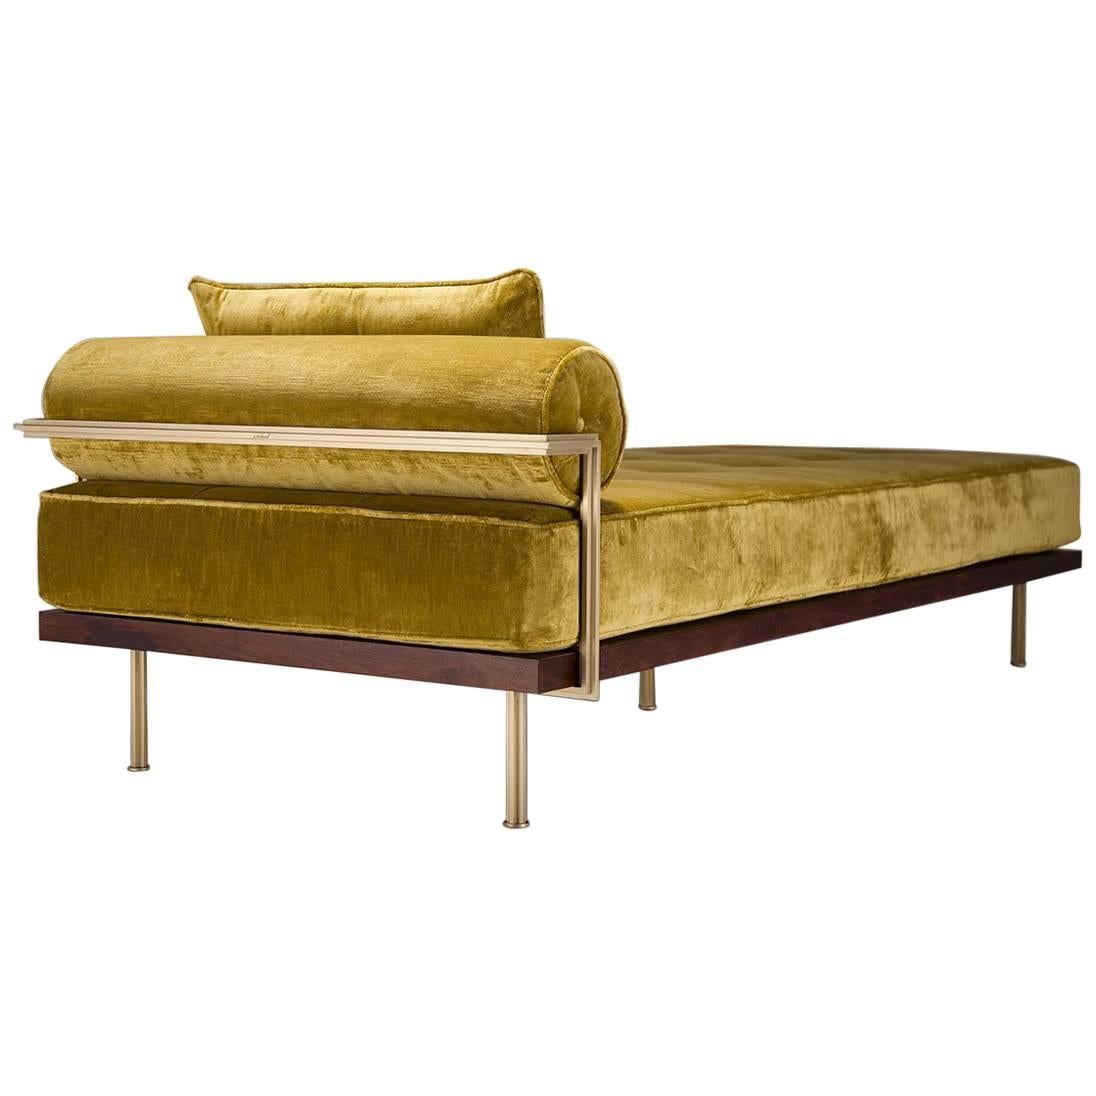 Bespoke Daybed, Reclaimed Hardwood in Brass Golden Sand Finish by P. Tendercool For Sale